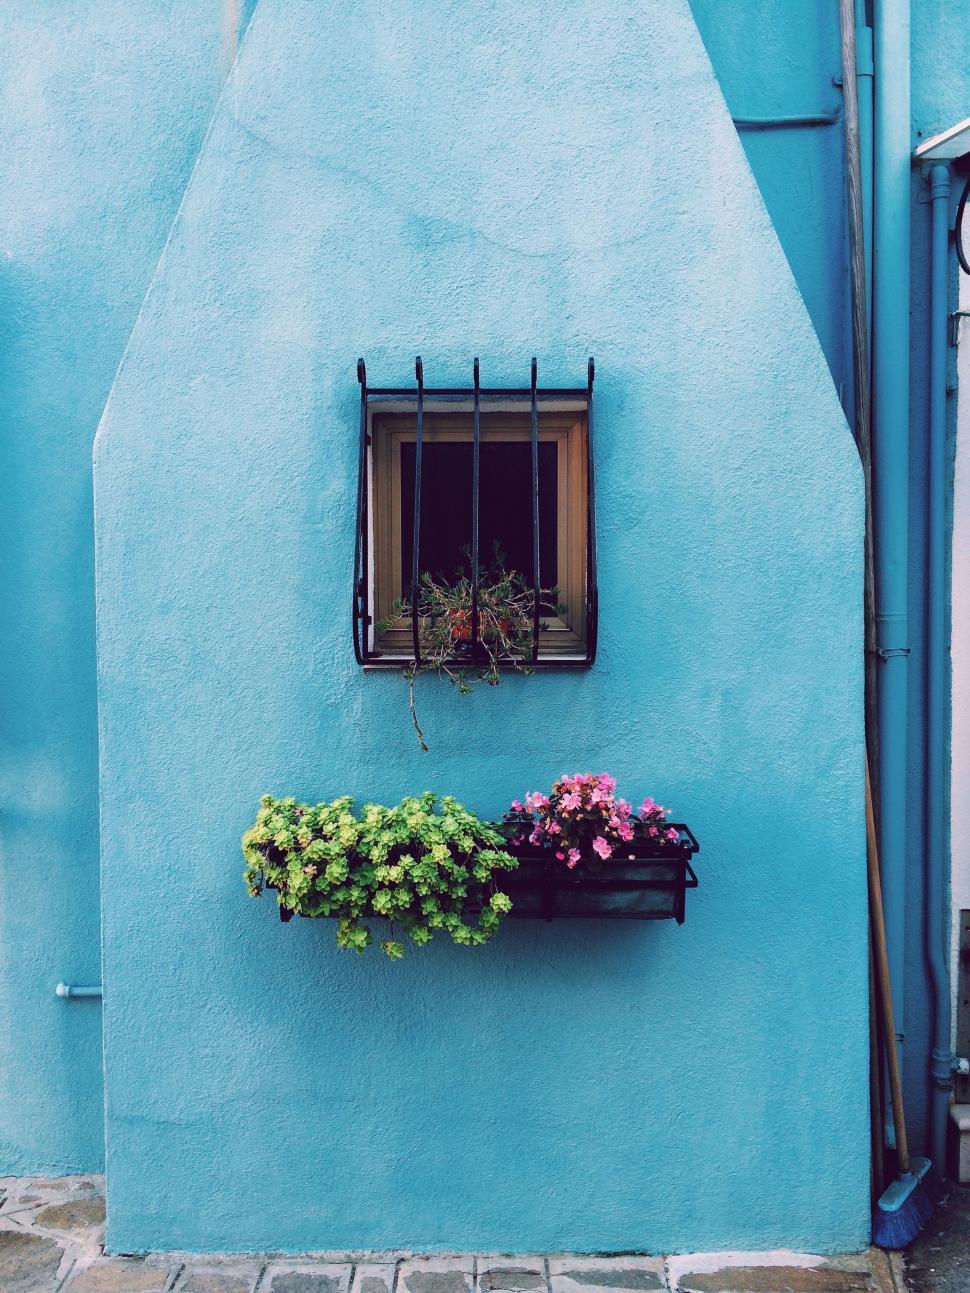 Free Image of Blue Building With Window and Planter 